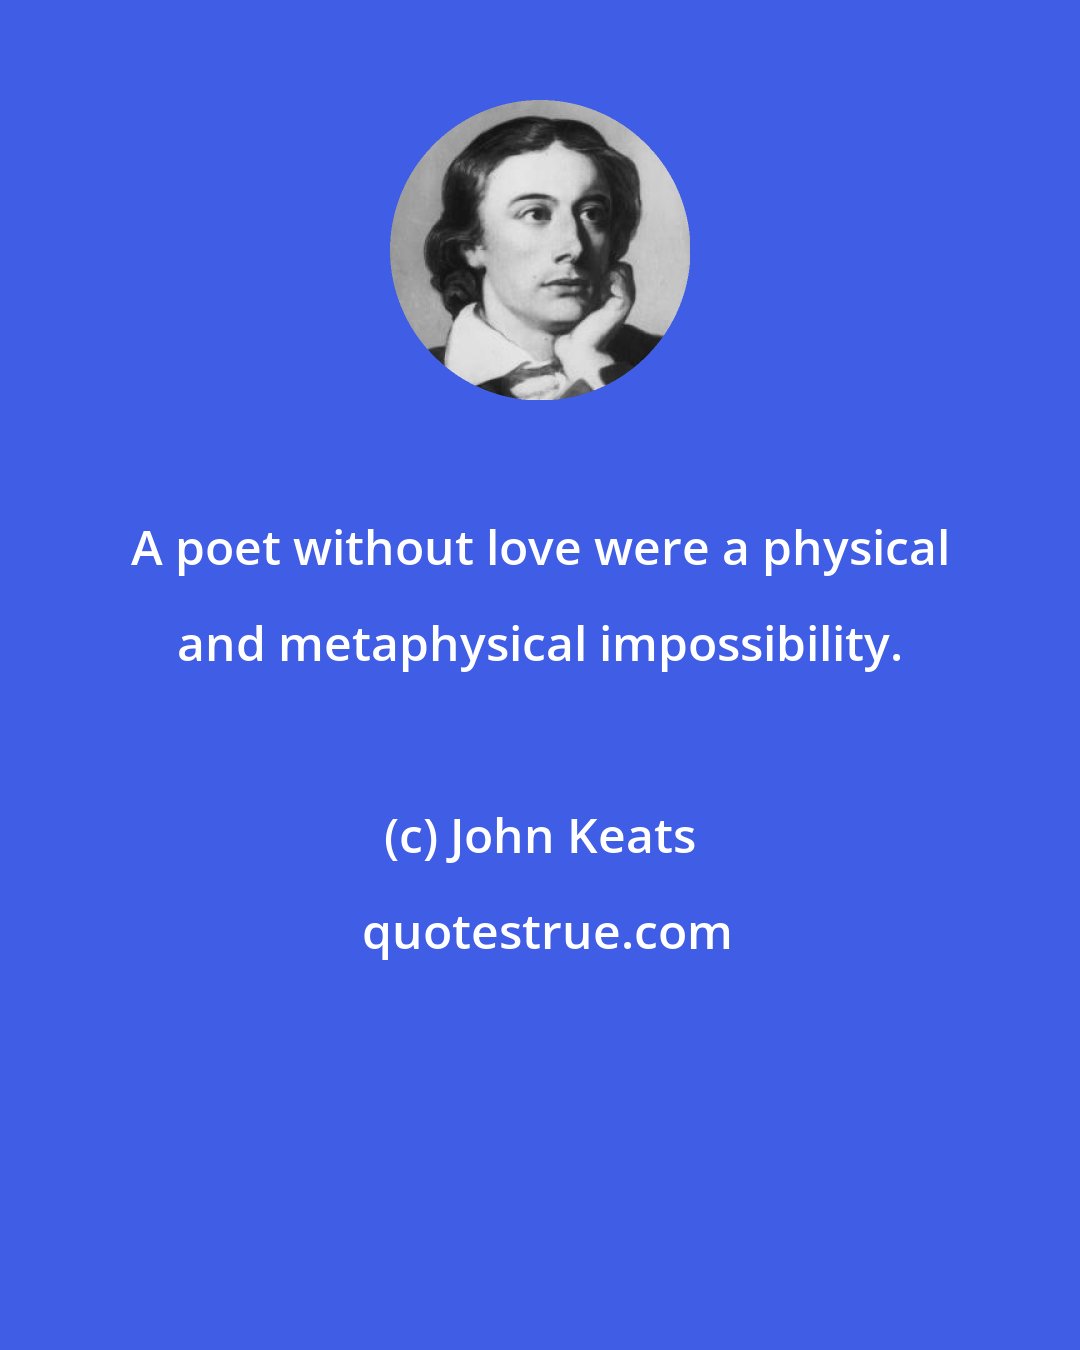 John Keats: A poet without love were a physical and metaphysical impossibility.